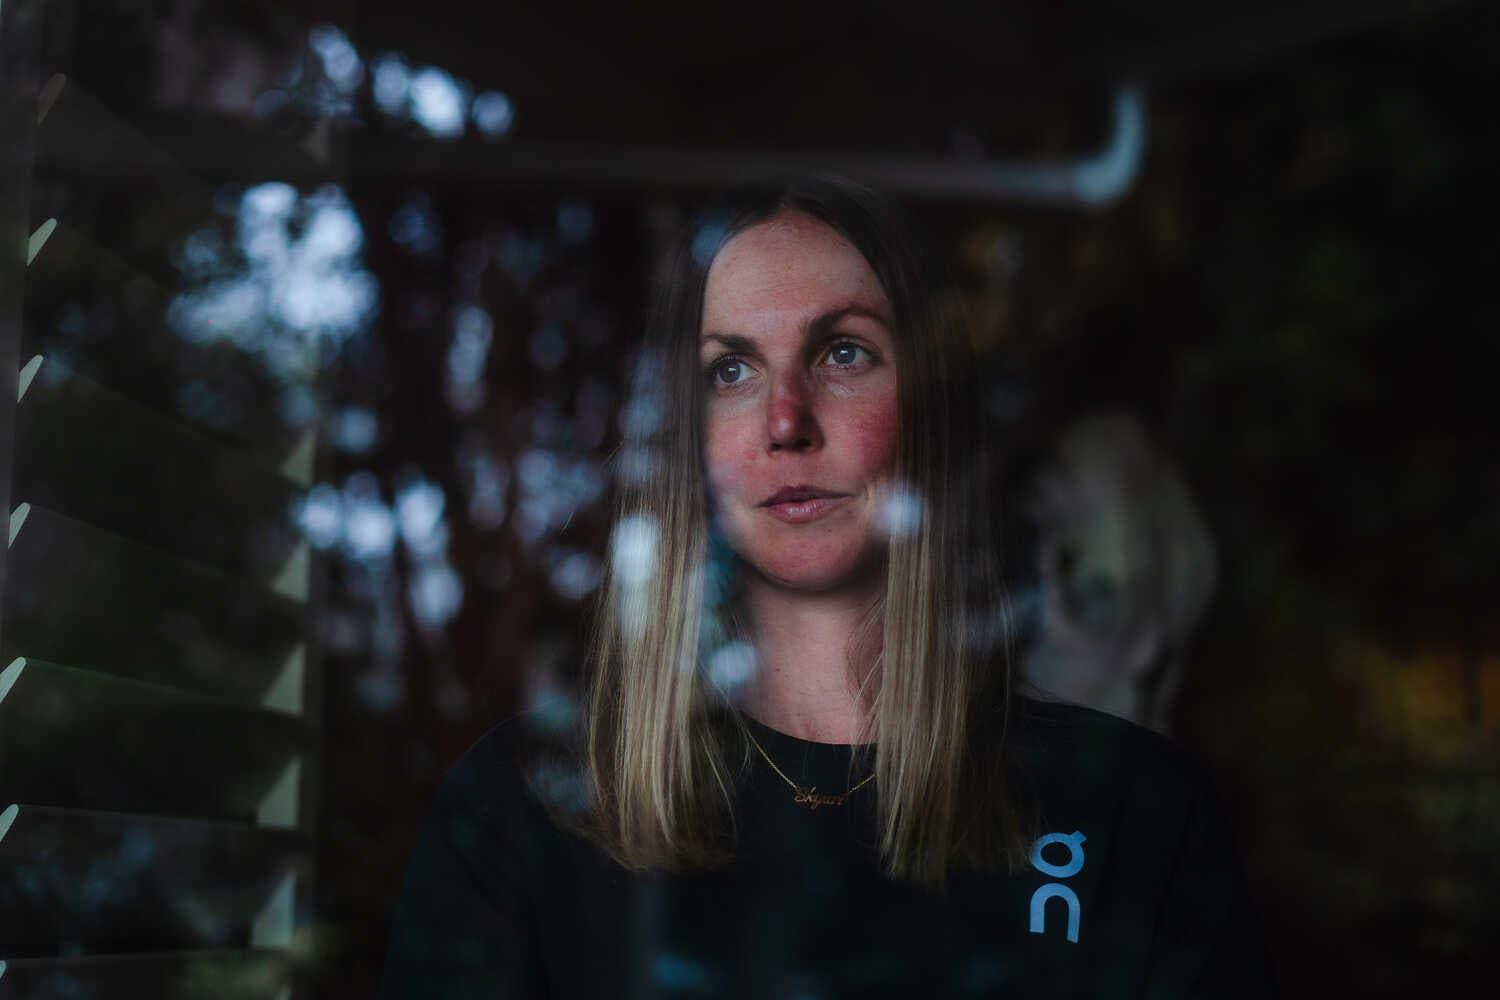 A portrait of Chelsea Sodaro, who is photographed through a window.